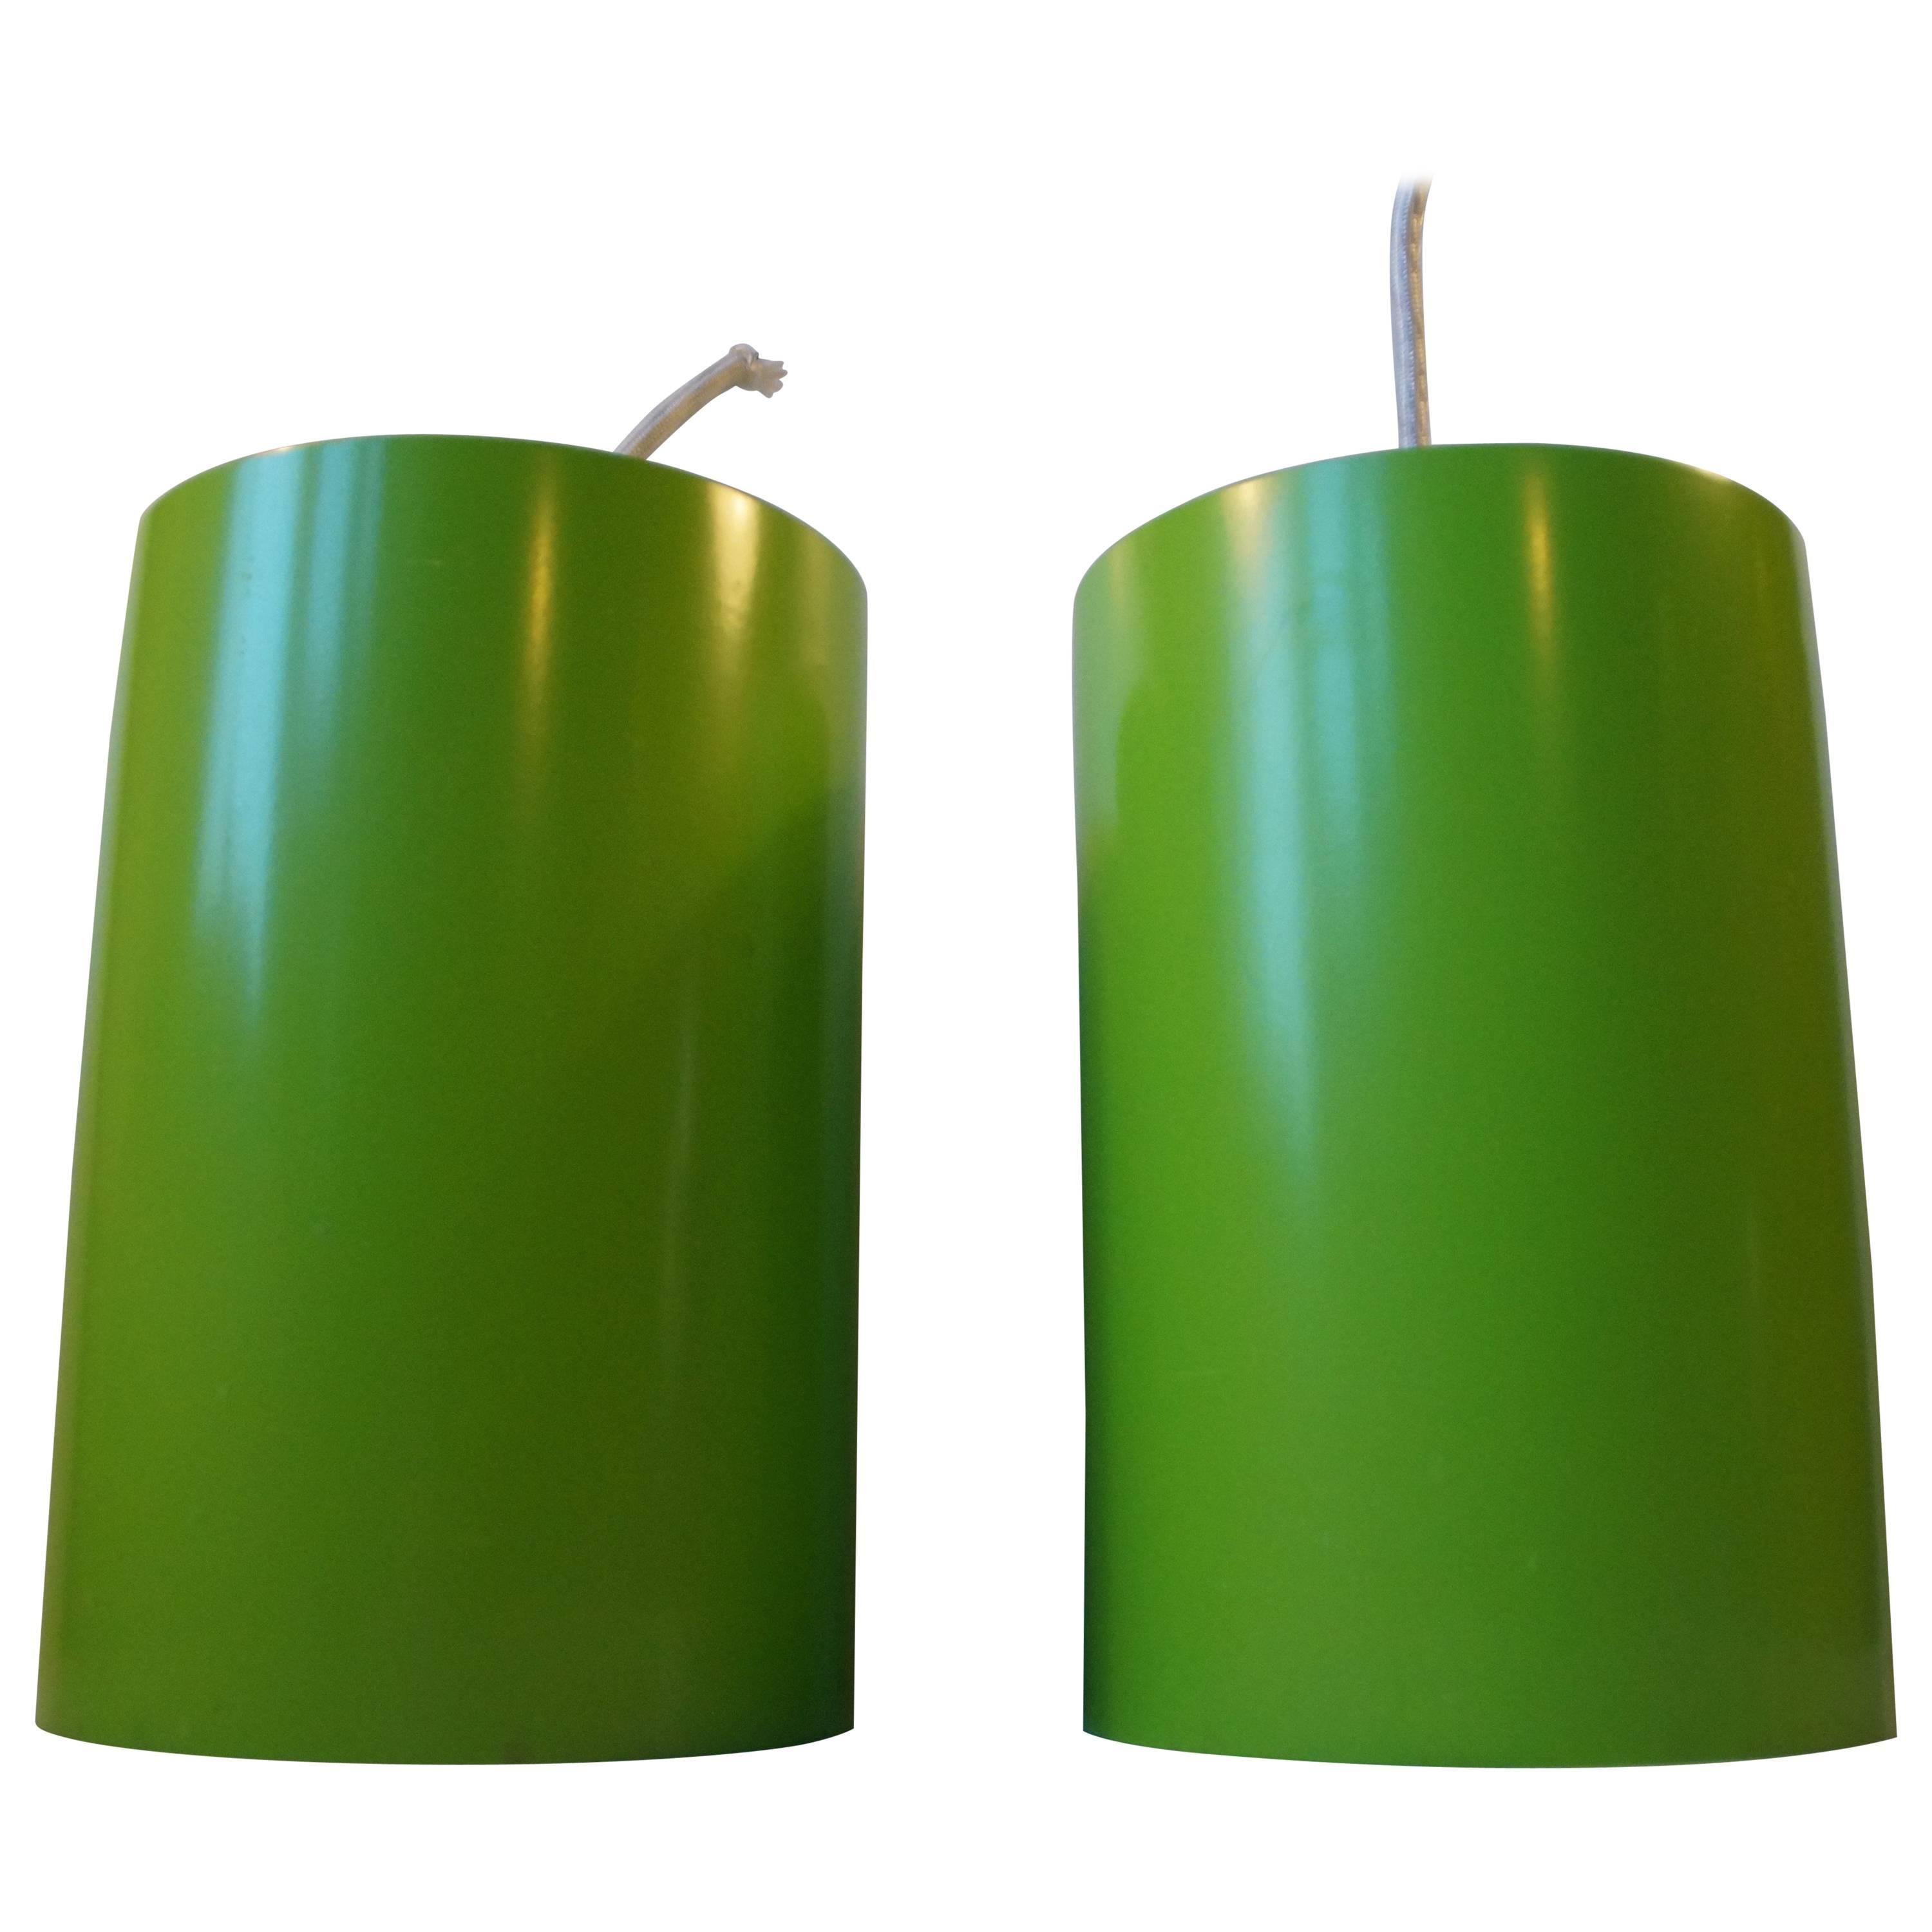 Pair of Cylindrical Avocado Green Pendant Lamps by Louis Poulsen, Denmark, 1970s